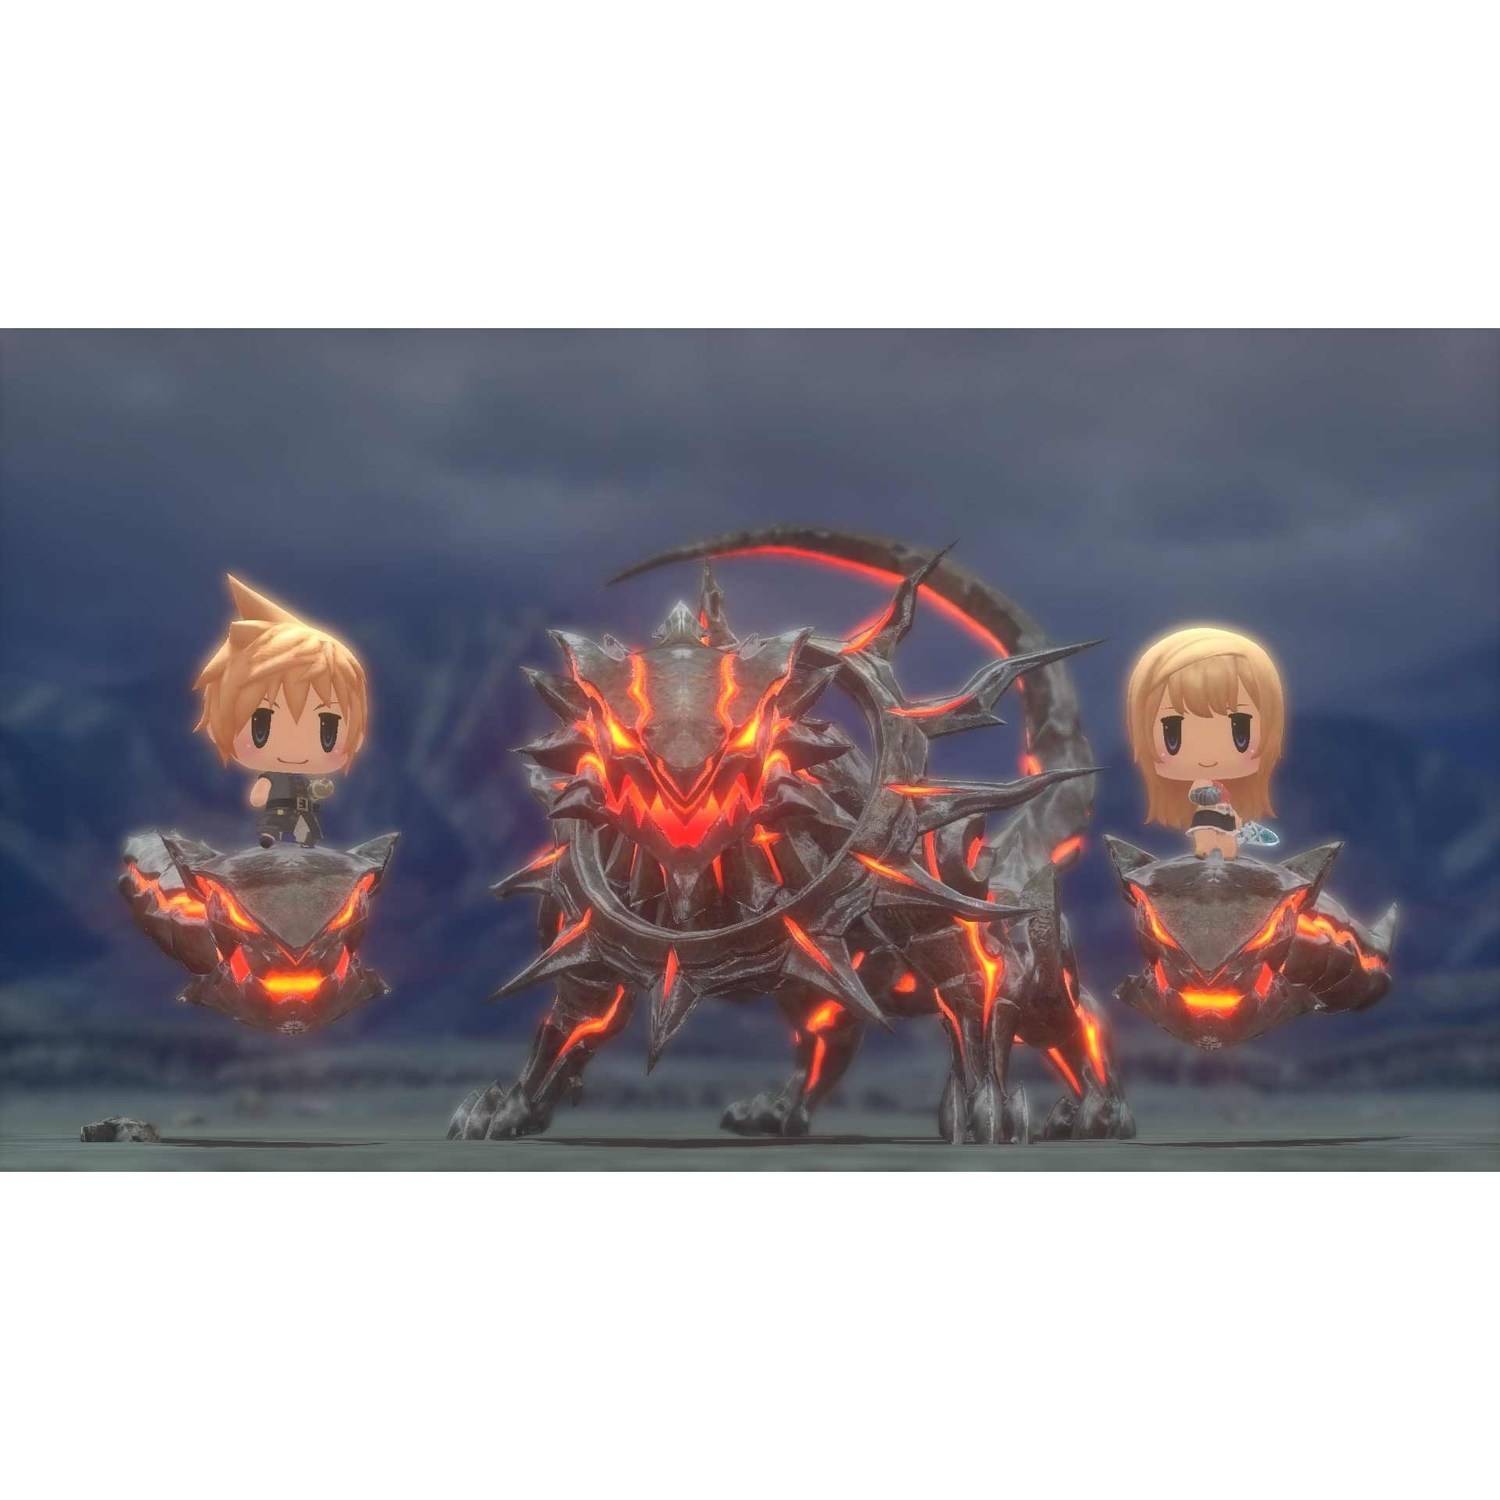 World of Final Fantasy, Square Enix, PlayStation 4, 662248918747 - image 2 of 17